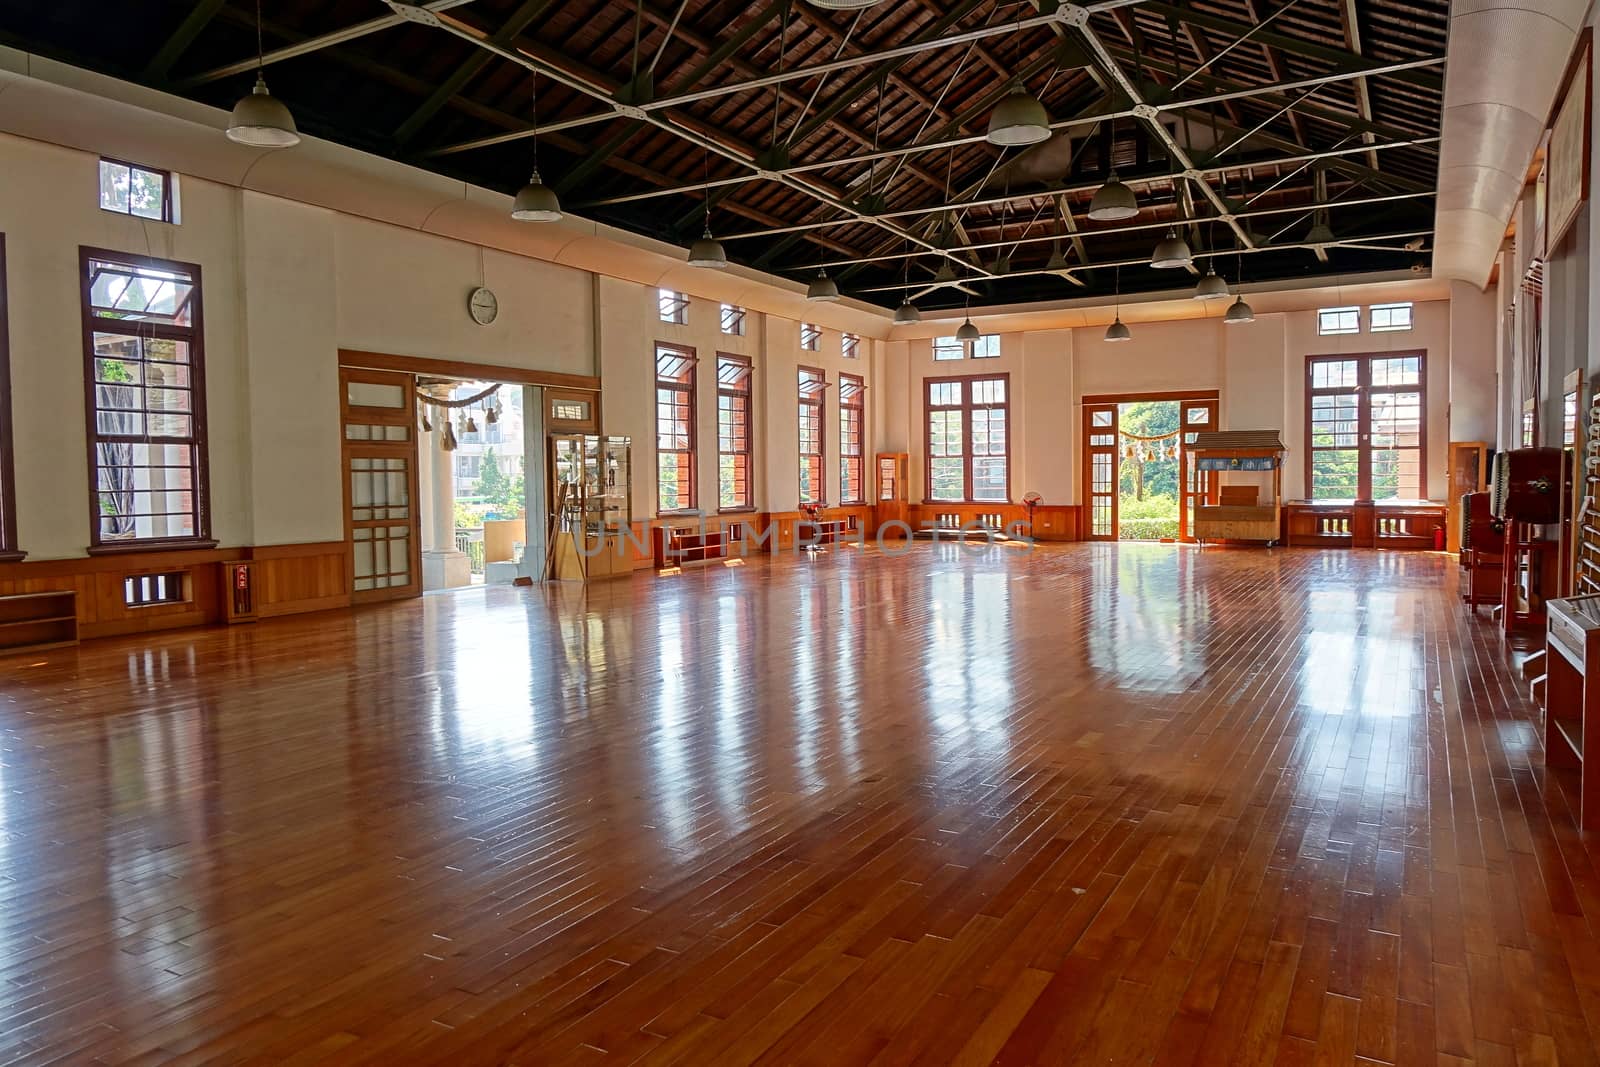 KAOHSIUNG, TAIWAN -- APRIL 29, 2017: Interior view of the Wu De Martial Arts Hall, which was originally built by the Japanese colonial government in 1924.